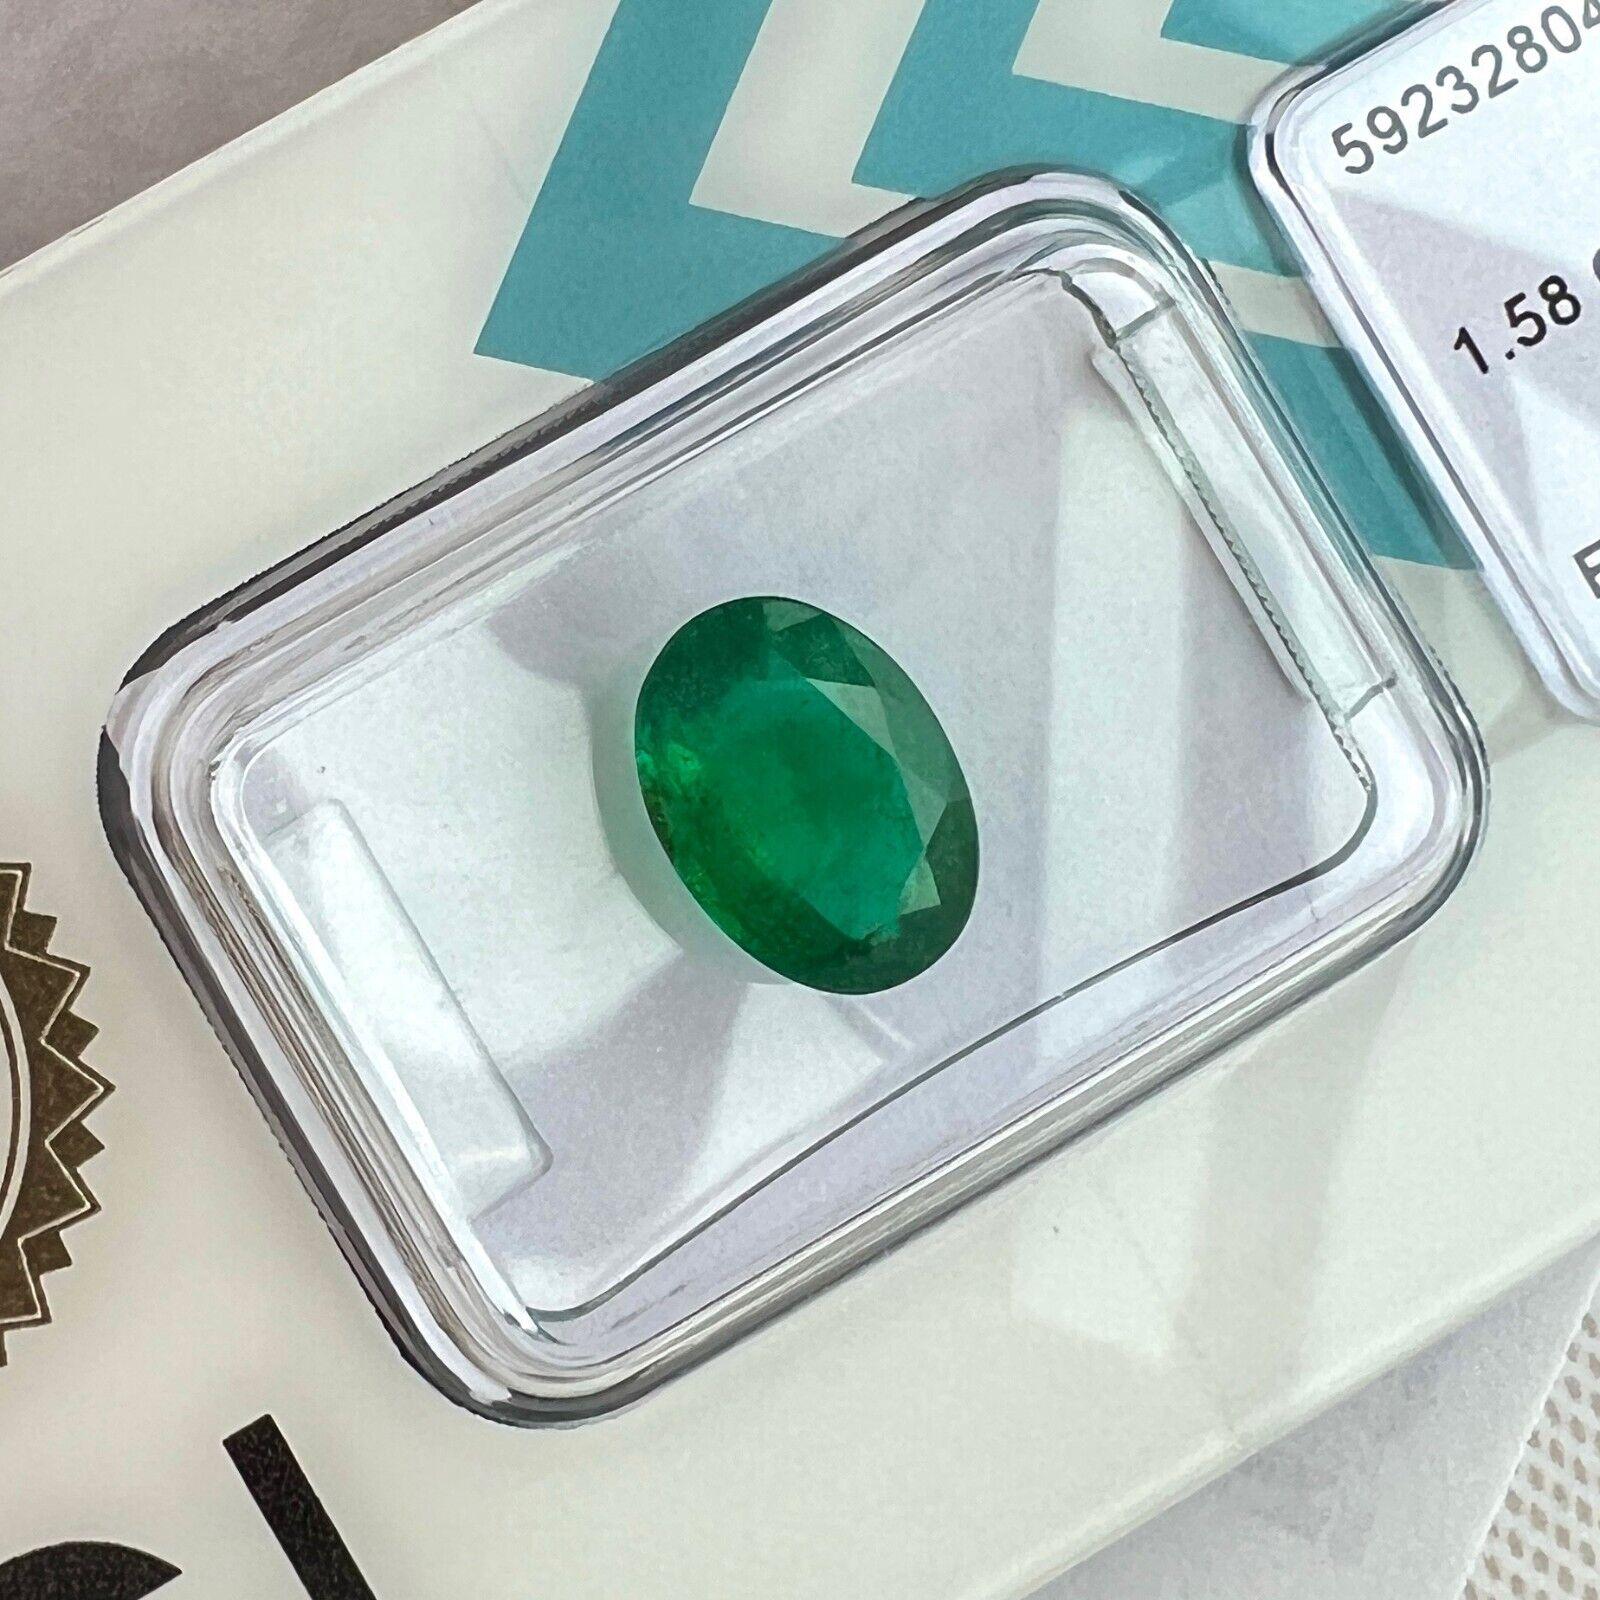 IGI Certified 1.58ct Natural Deep Green Emerald Oval Cut Loose Gemstone

GIA Certified Natural Green Zambia Emerald Gemstone.
1.58 Carat emerald with a fine deep green colour and good clarity. Clean stone with only some small natural inclusions